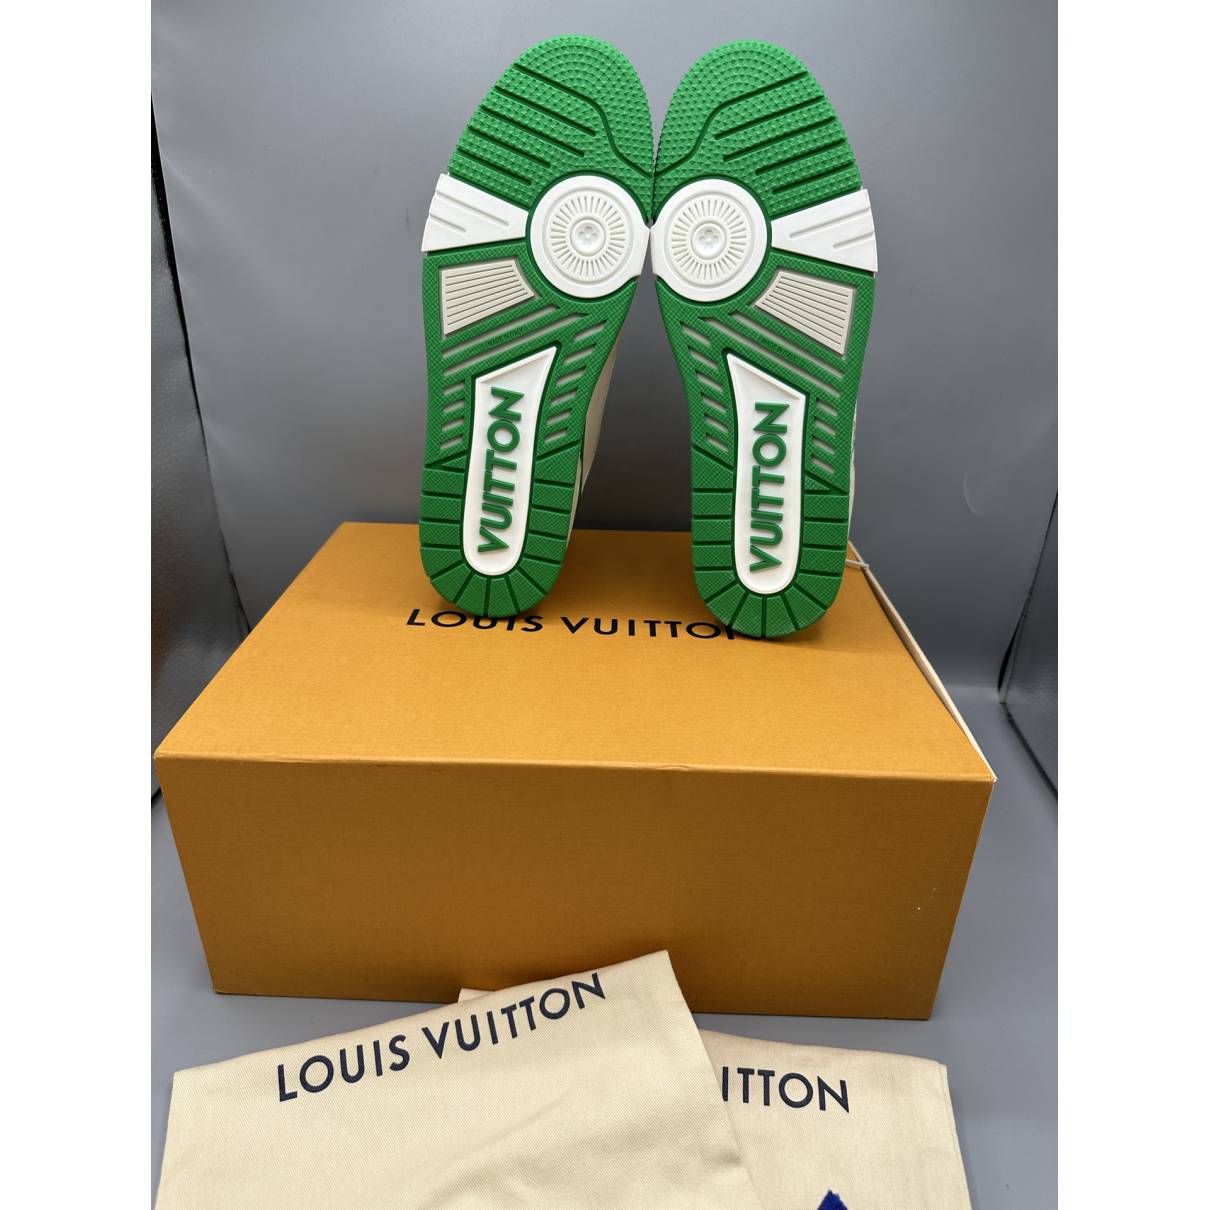 Lv trainer leather low trainers Louis Vuitton Green size 9 UK in Leather -  34091870